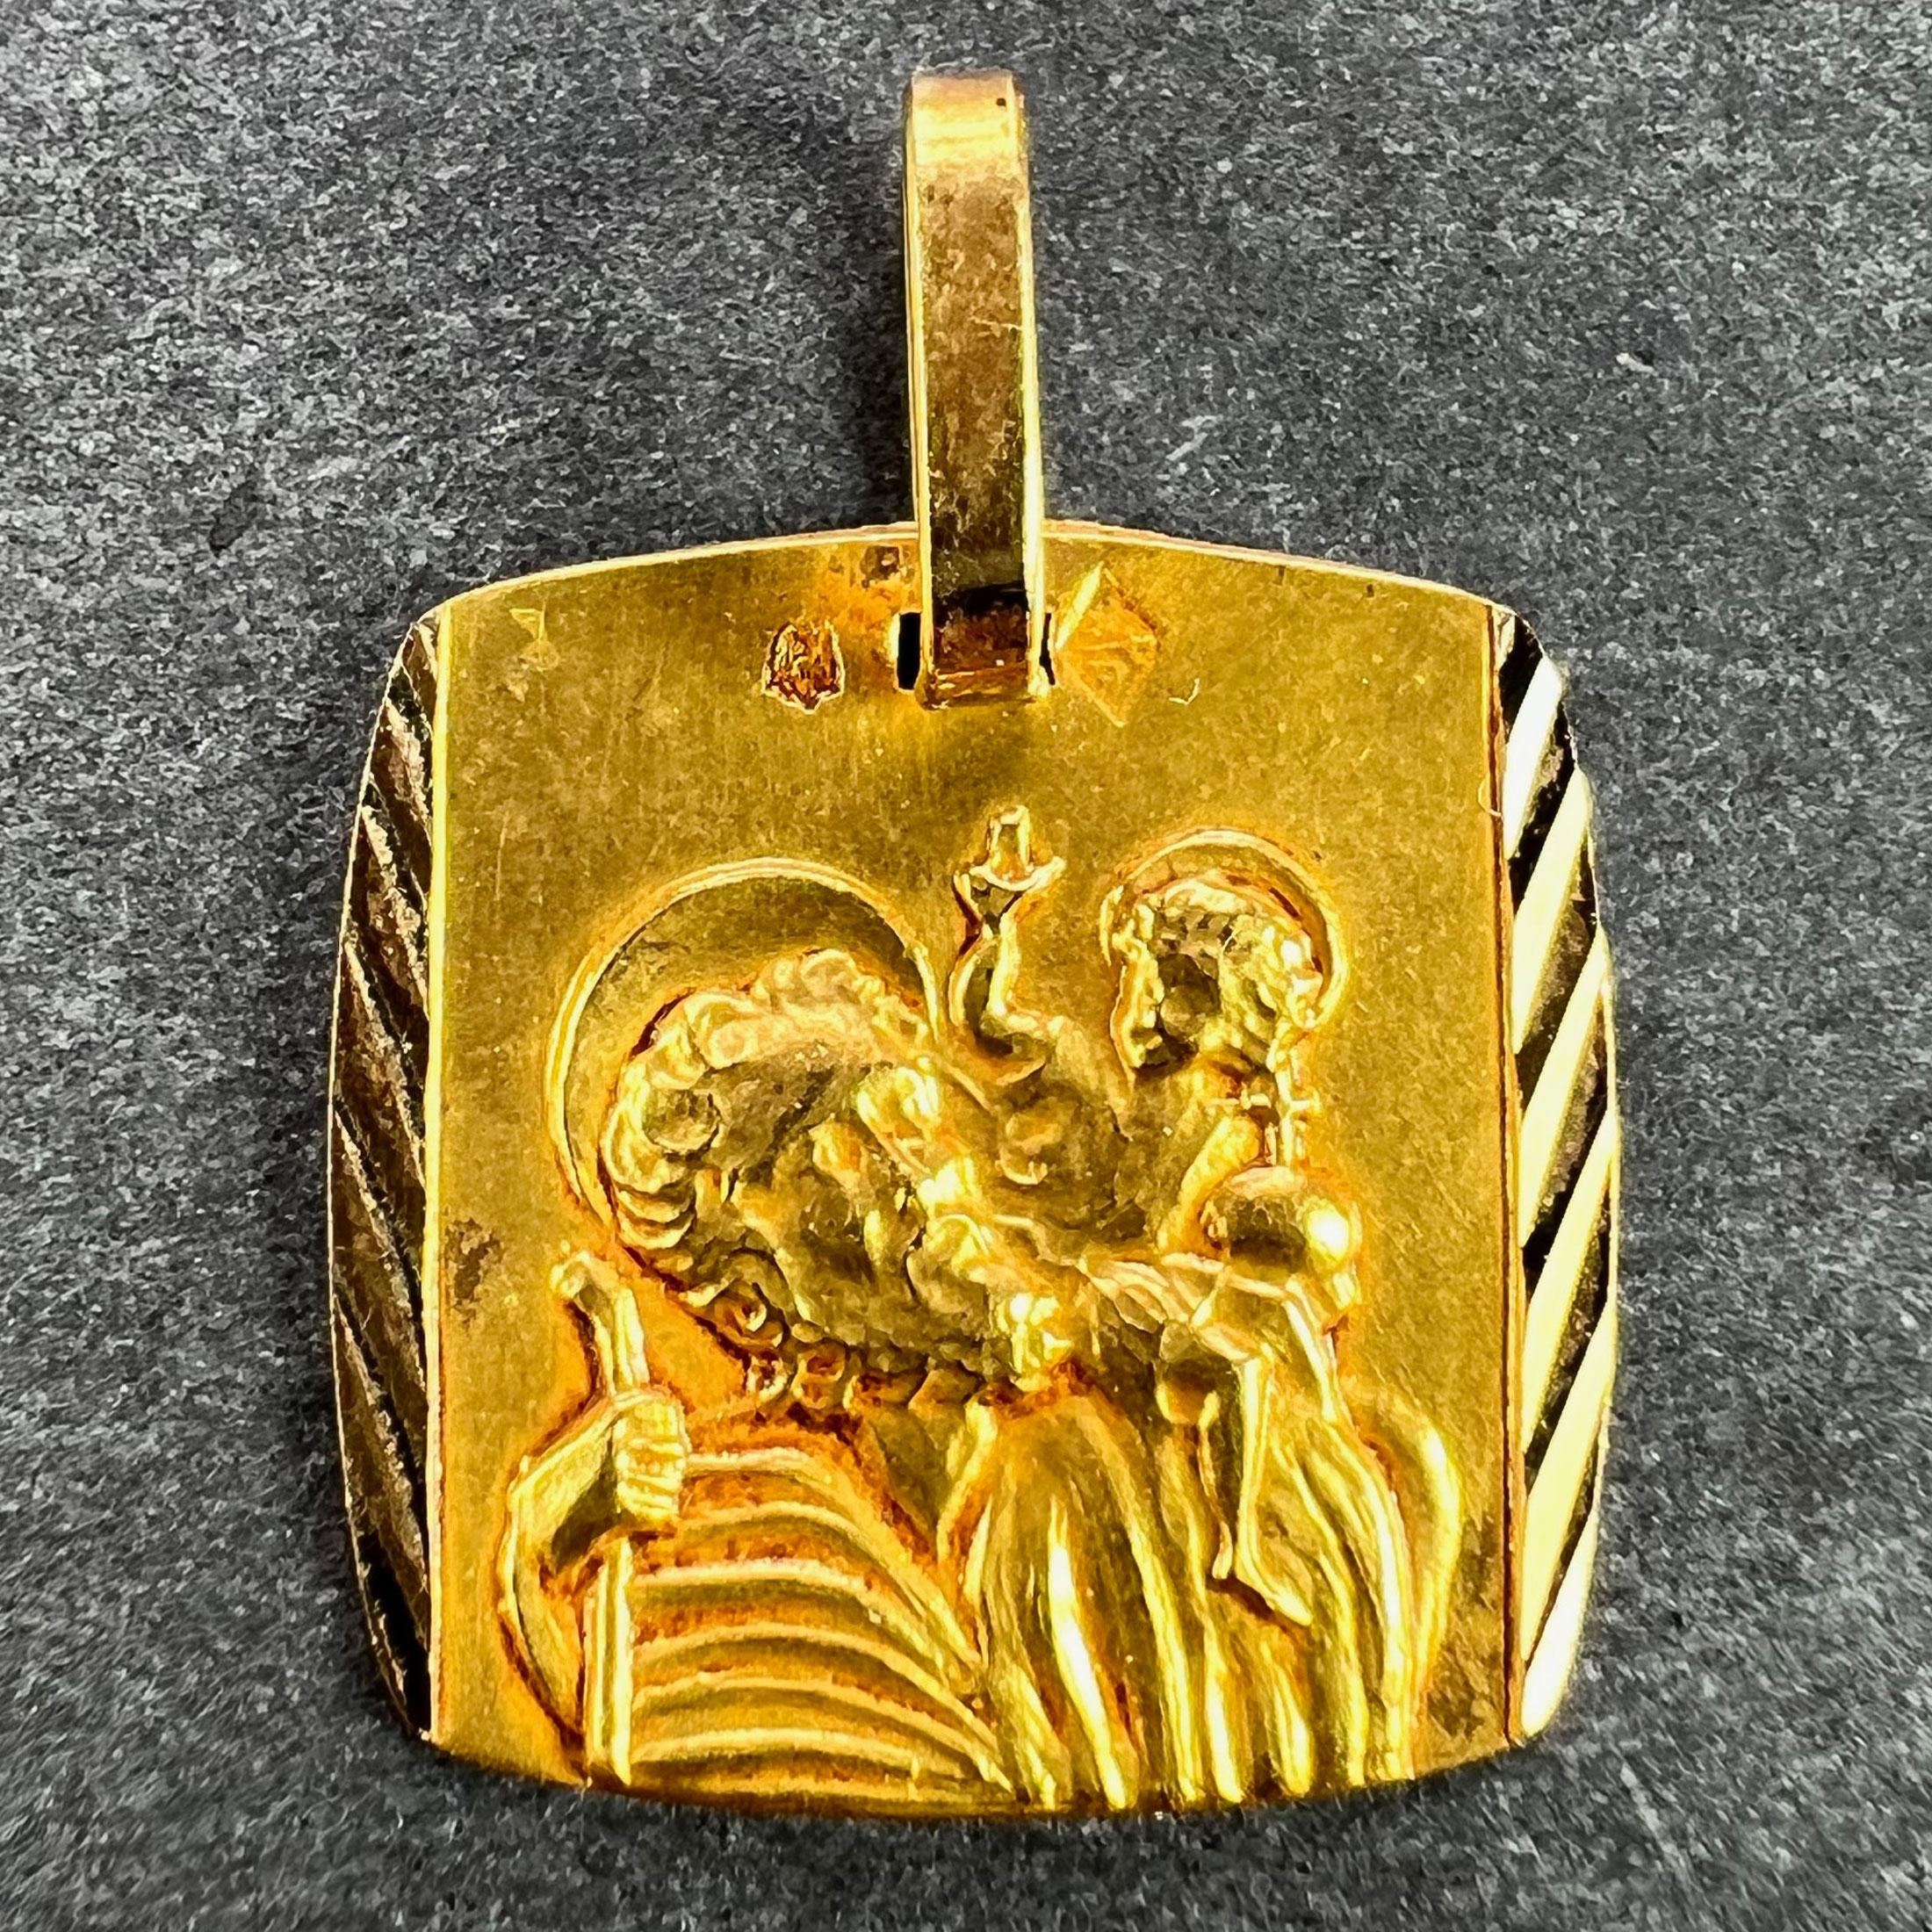 A French 18 karat (18K) yellow gold charm pendant designed as a medal depicting Saint Christopher carrying the infant Christ. Stamped with the eagles head for 18 karat gold and French manufacture and an unknown makers mark.

Dimensions: 1.4 x 1.4 x